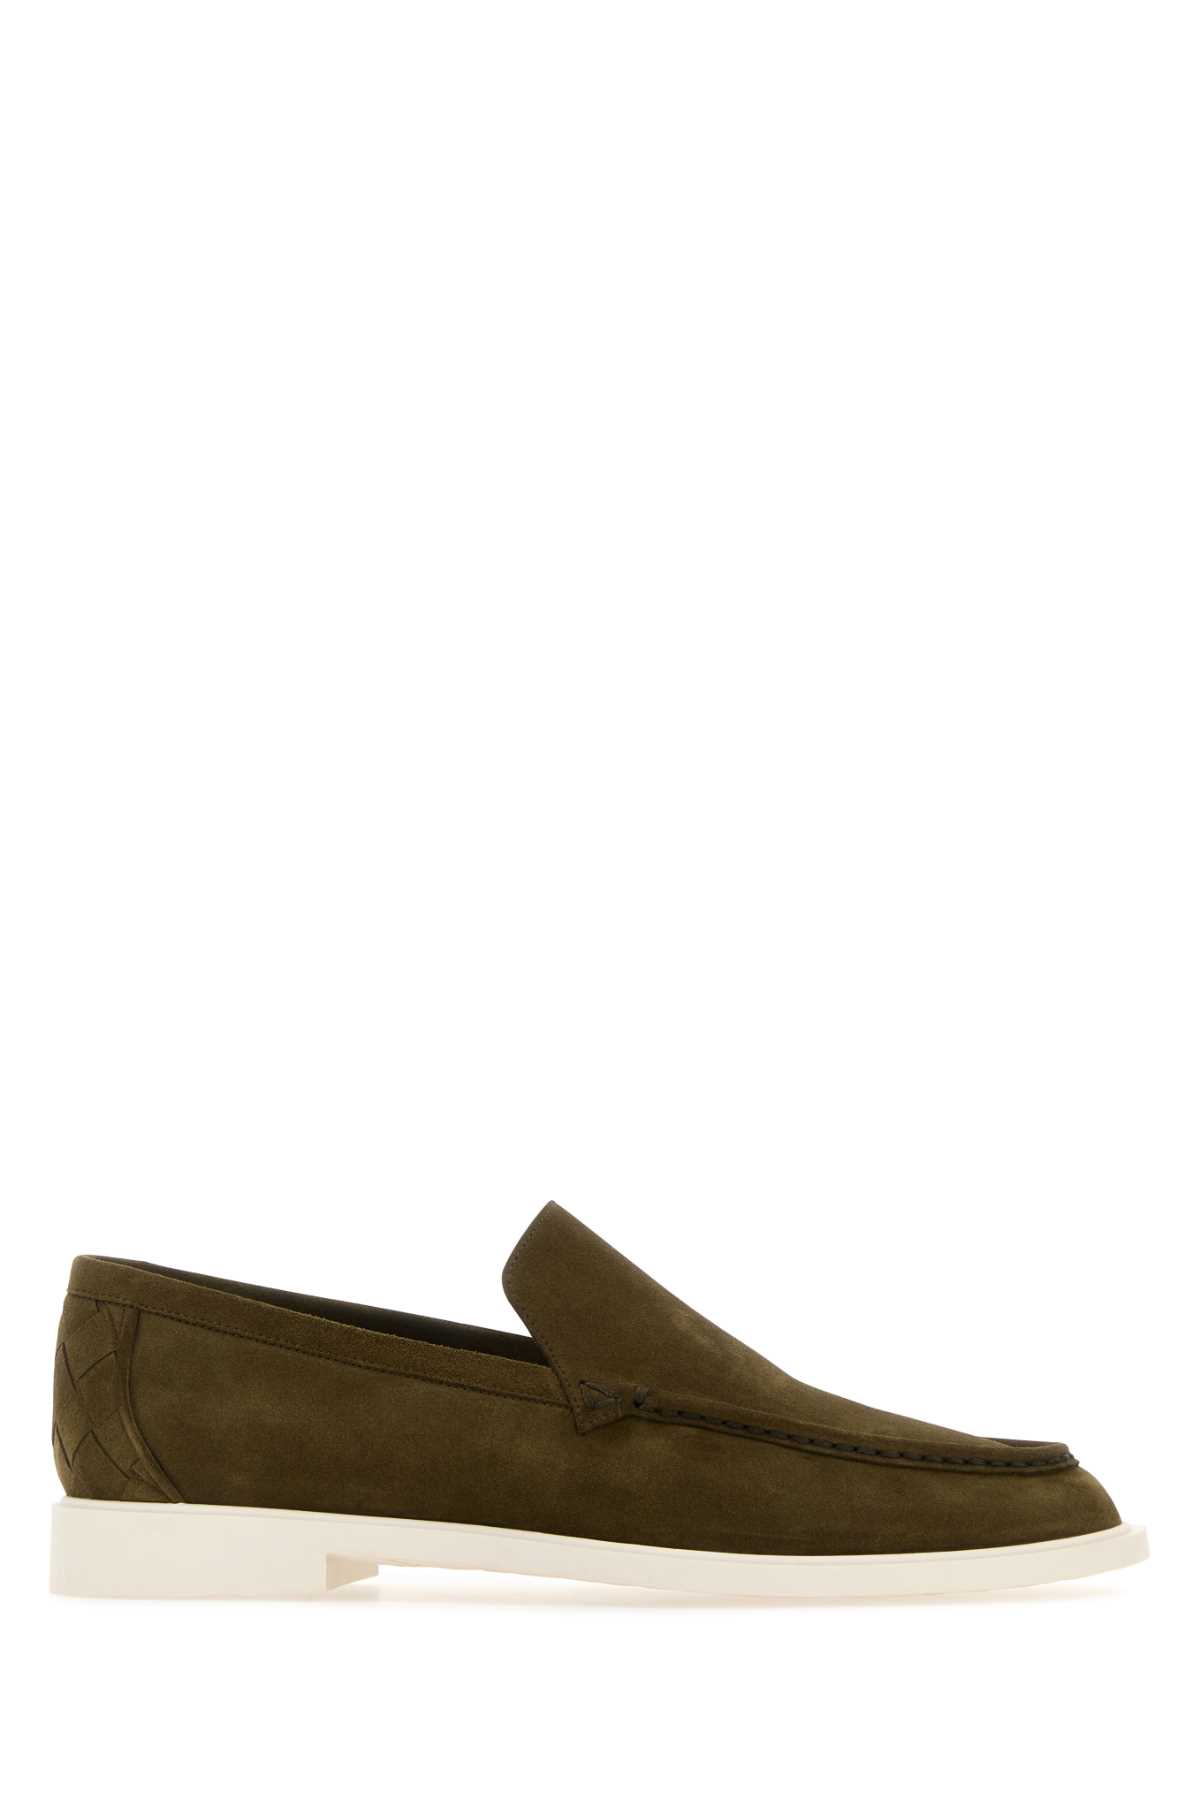 Mud Suede Astaire Loafers